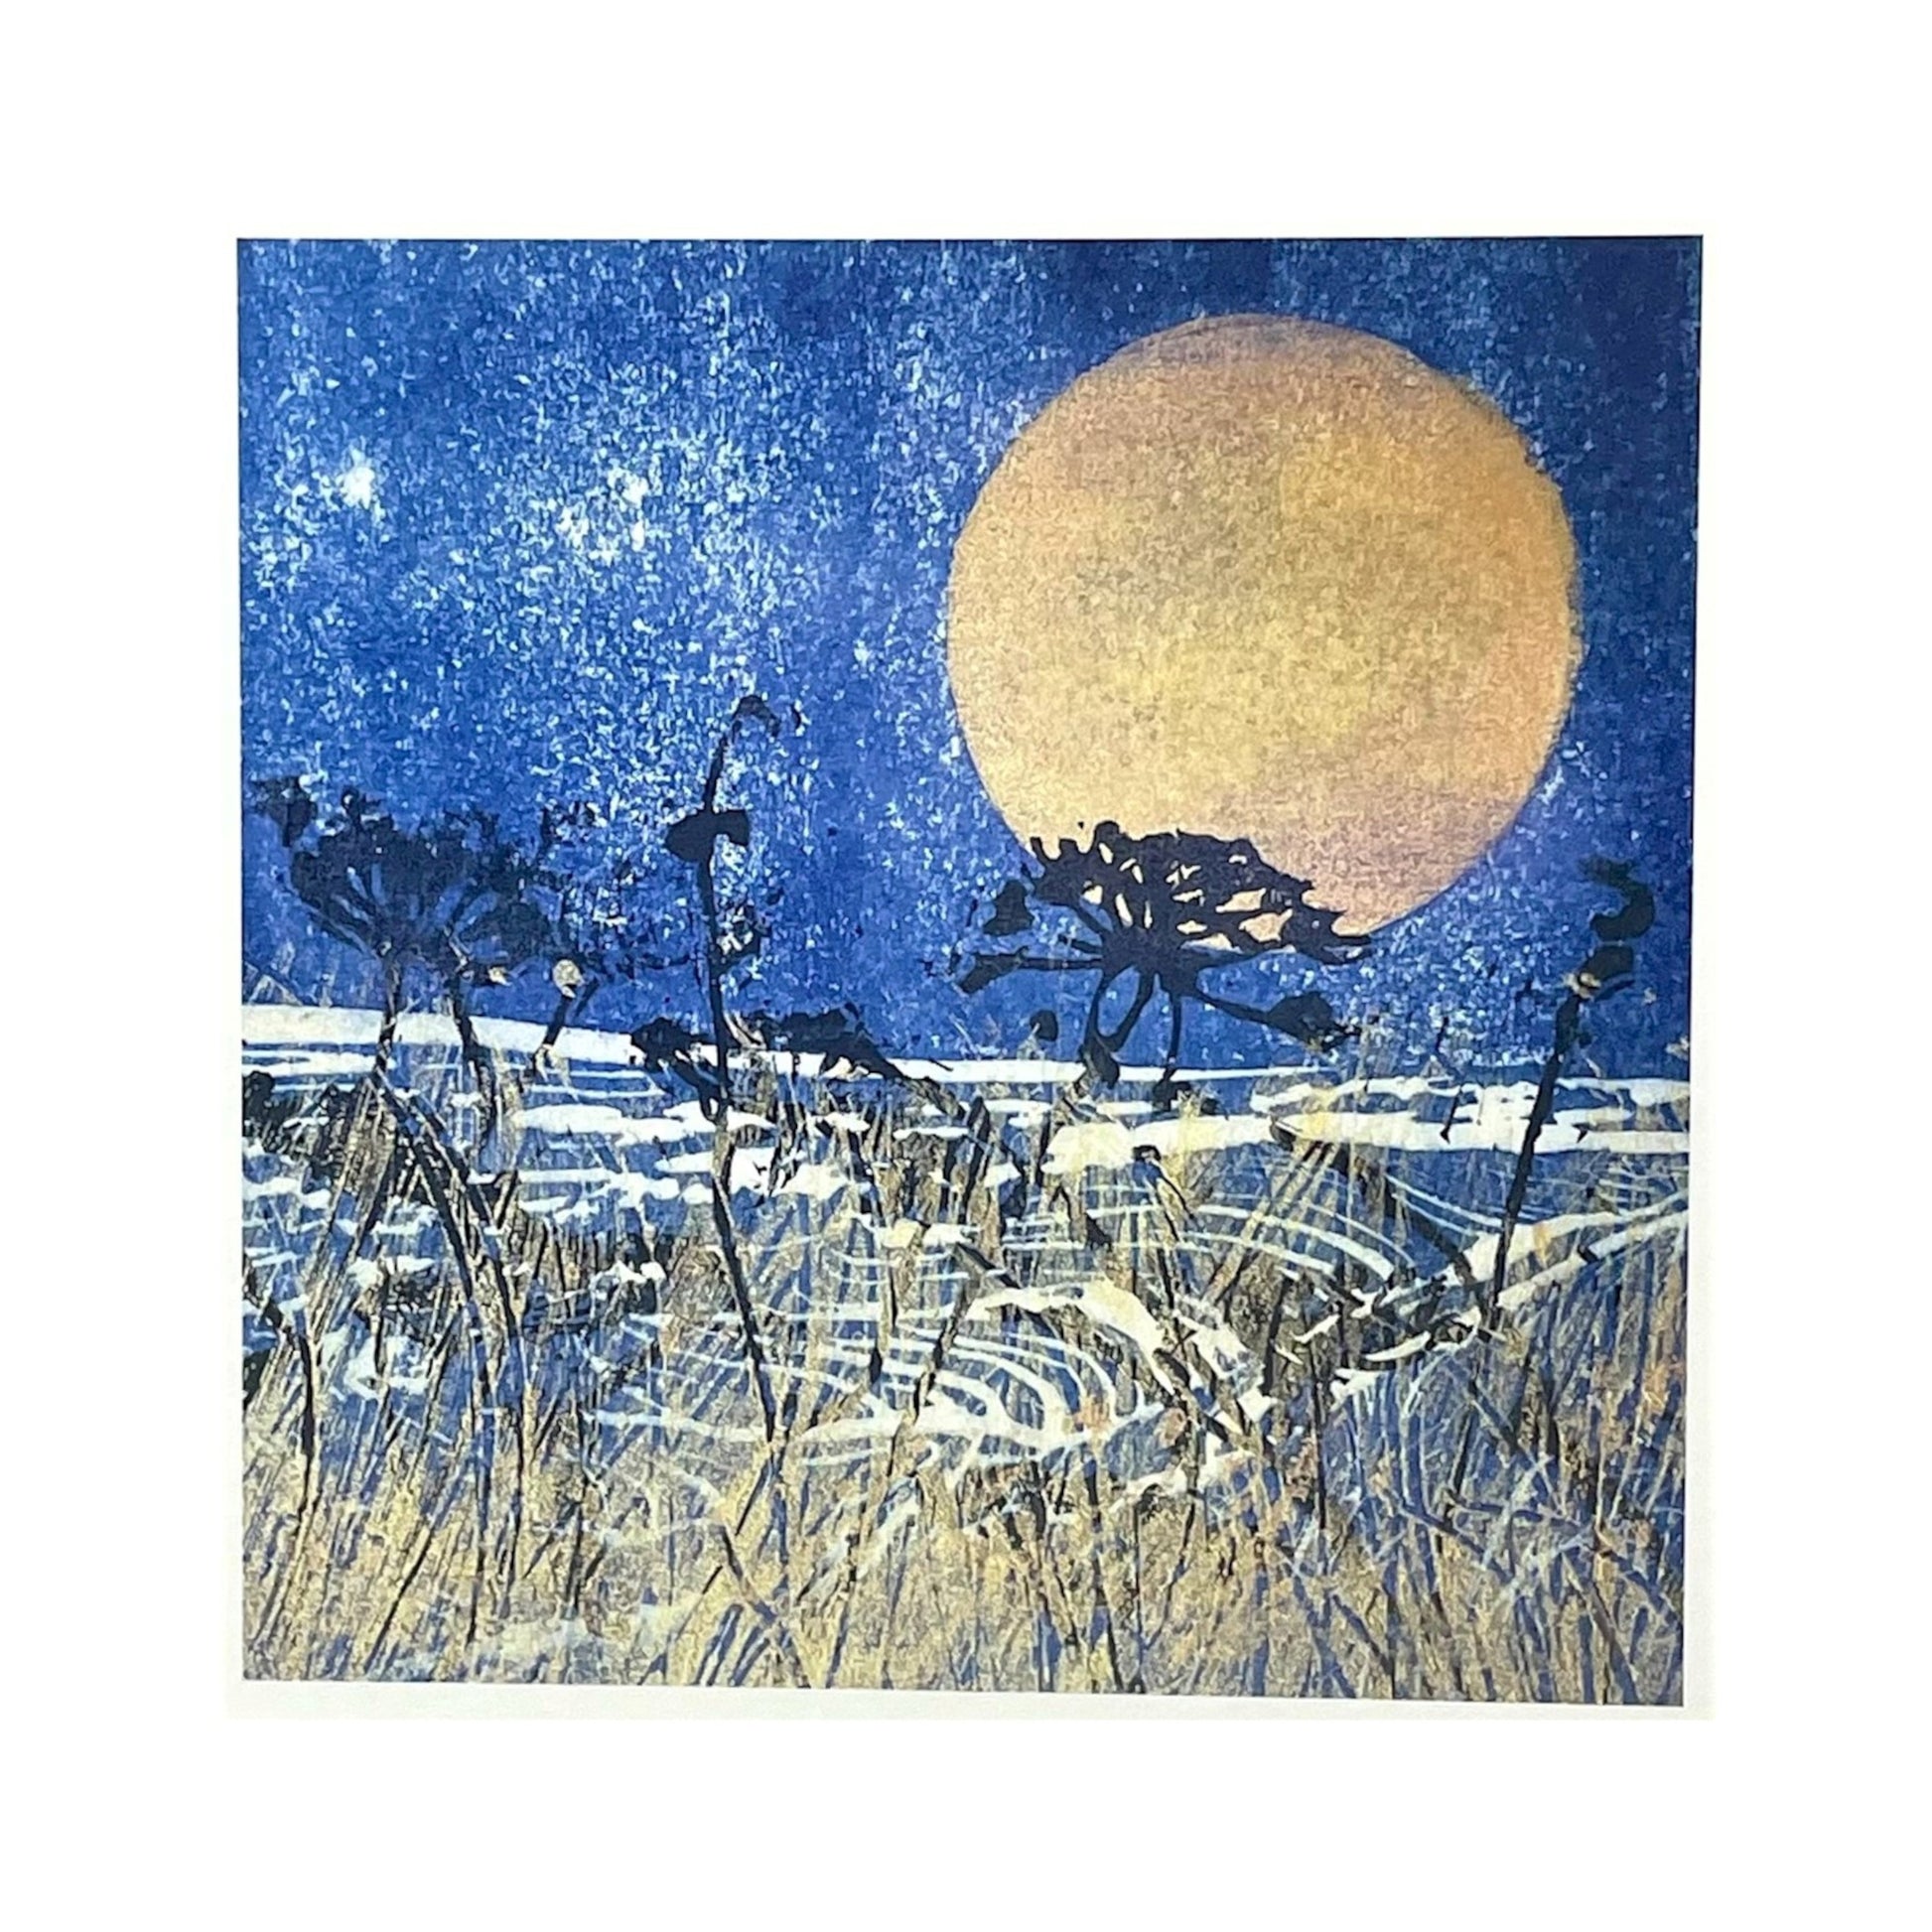 greetings card showing a huge full moon with seed heads in the foreground by John Austin Publishing